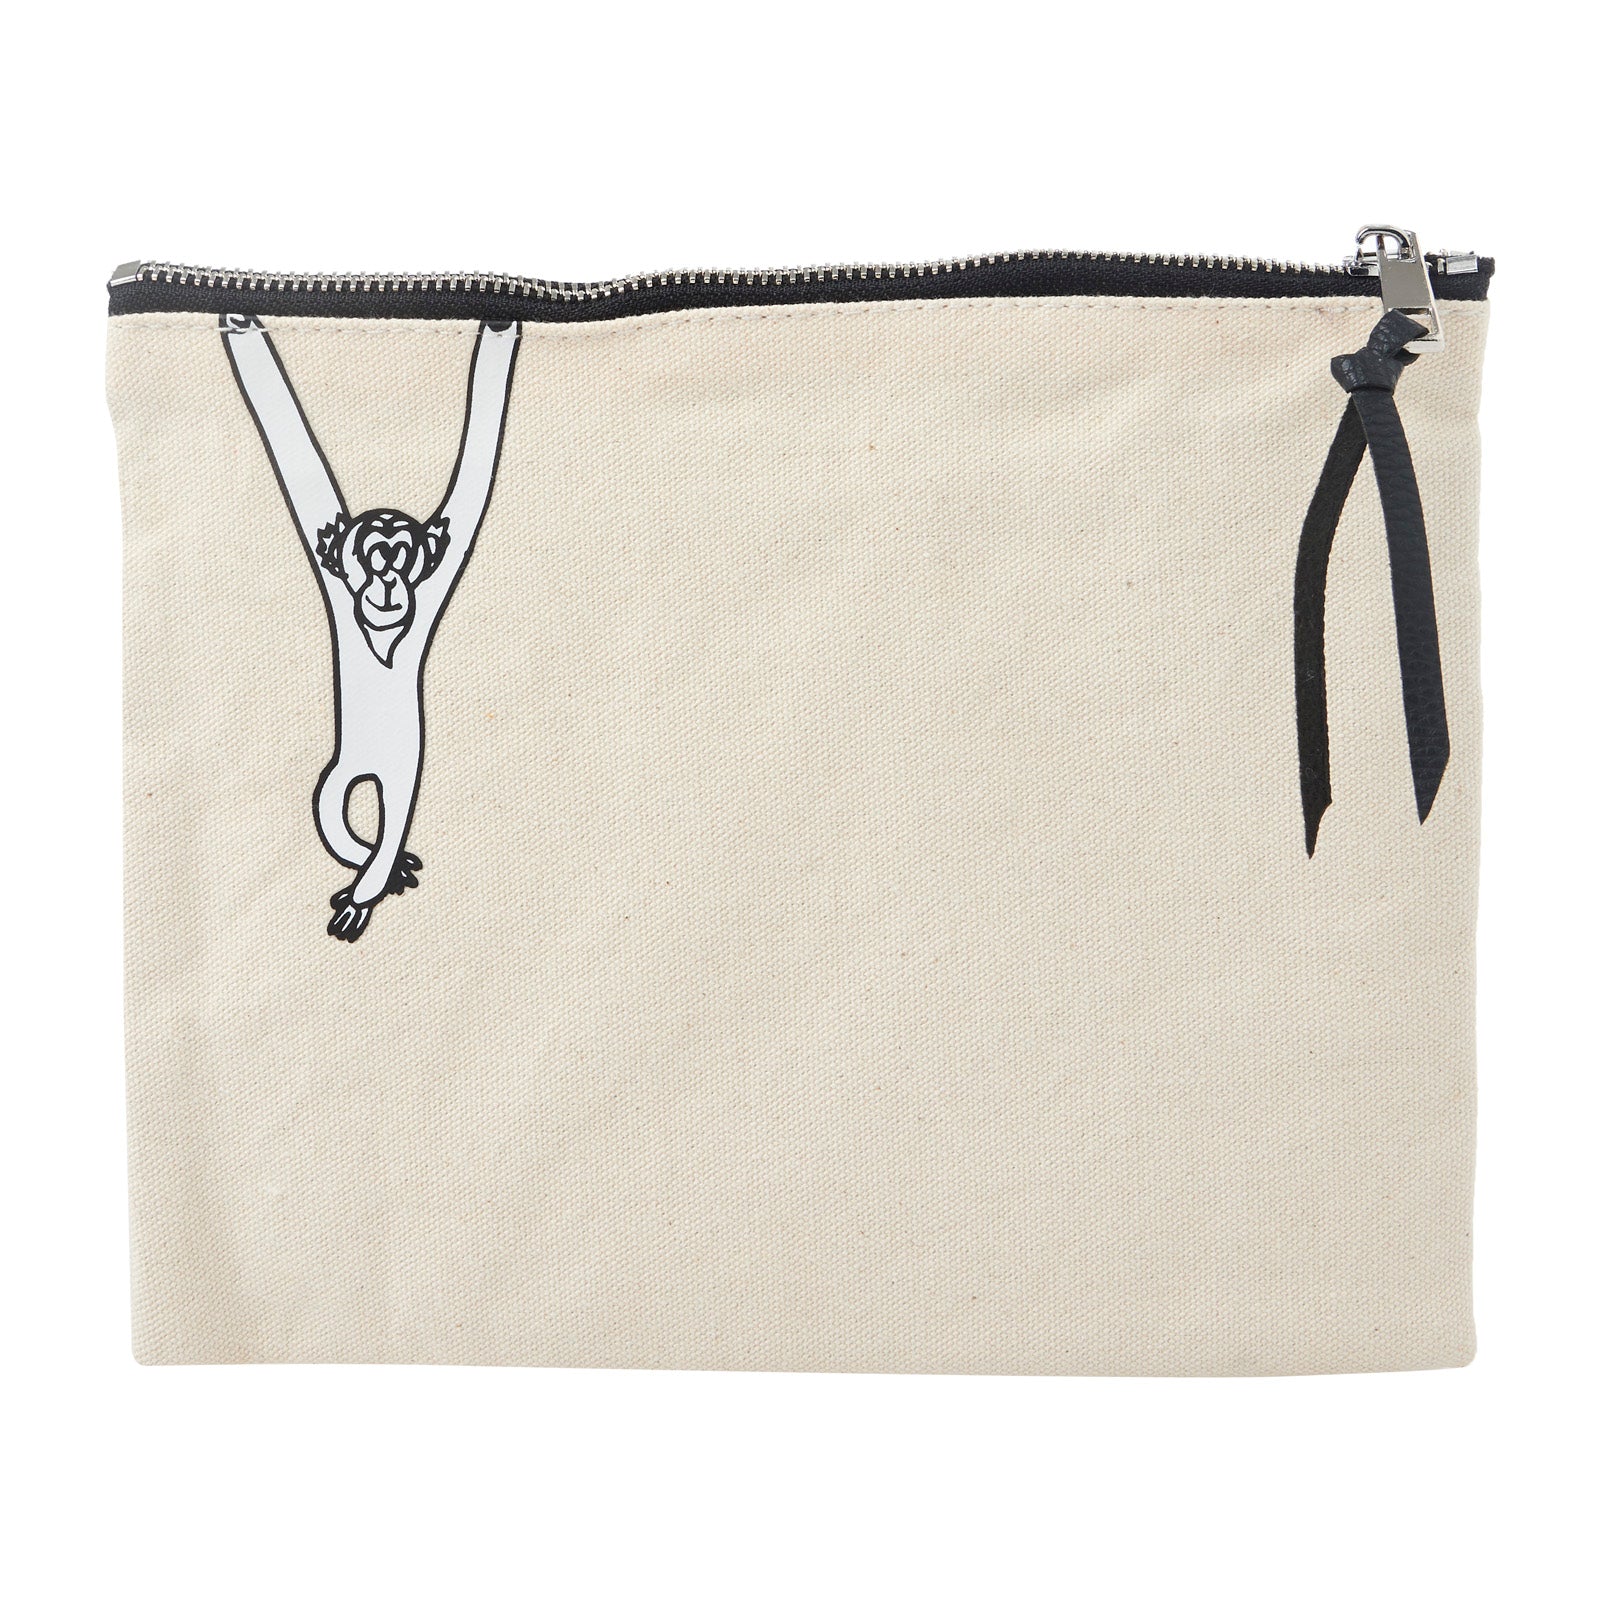 Pouch - Gibbon Design | The Animal Project